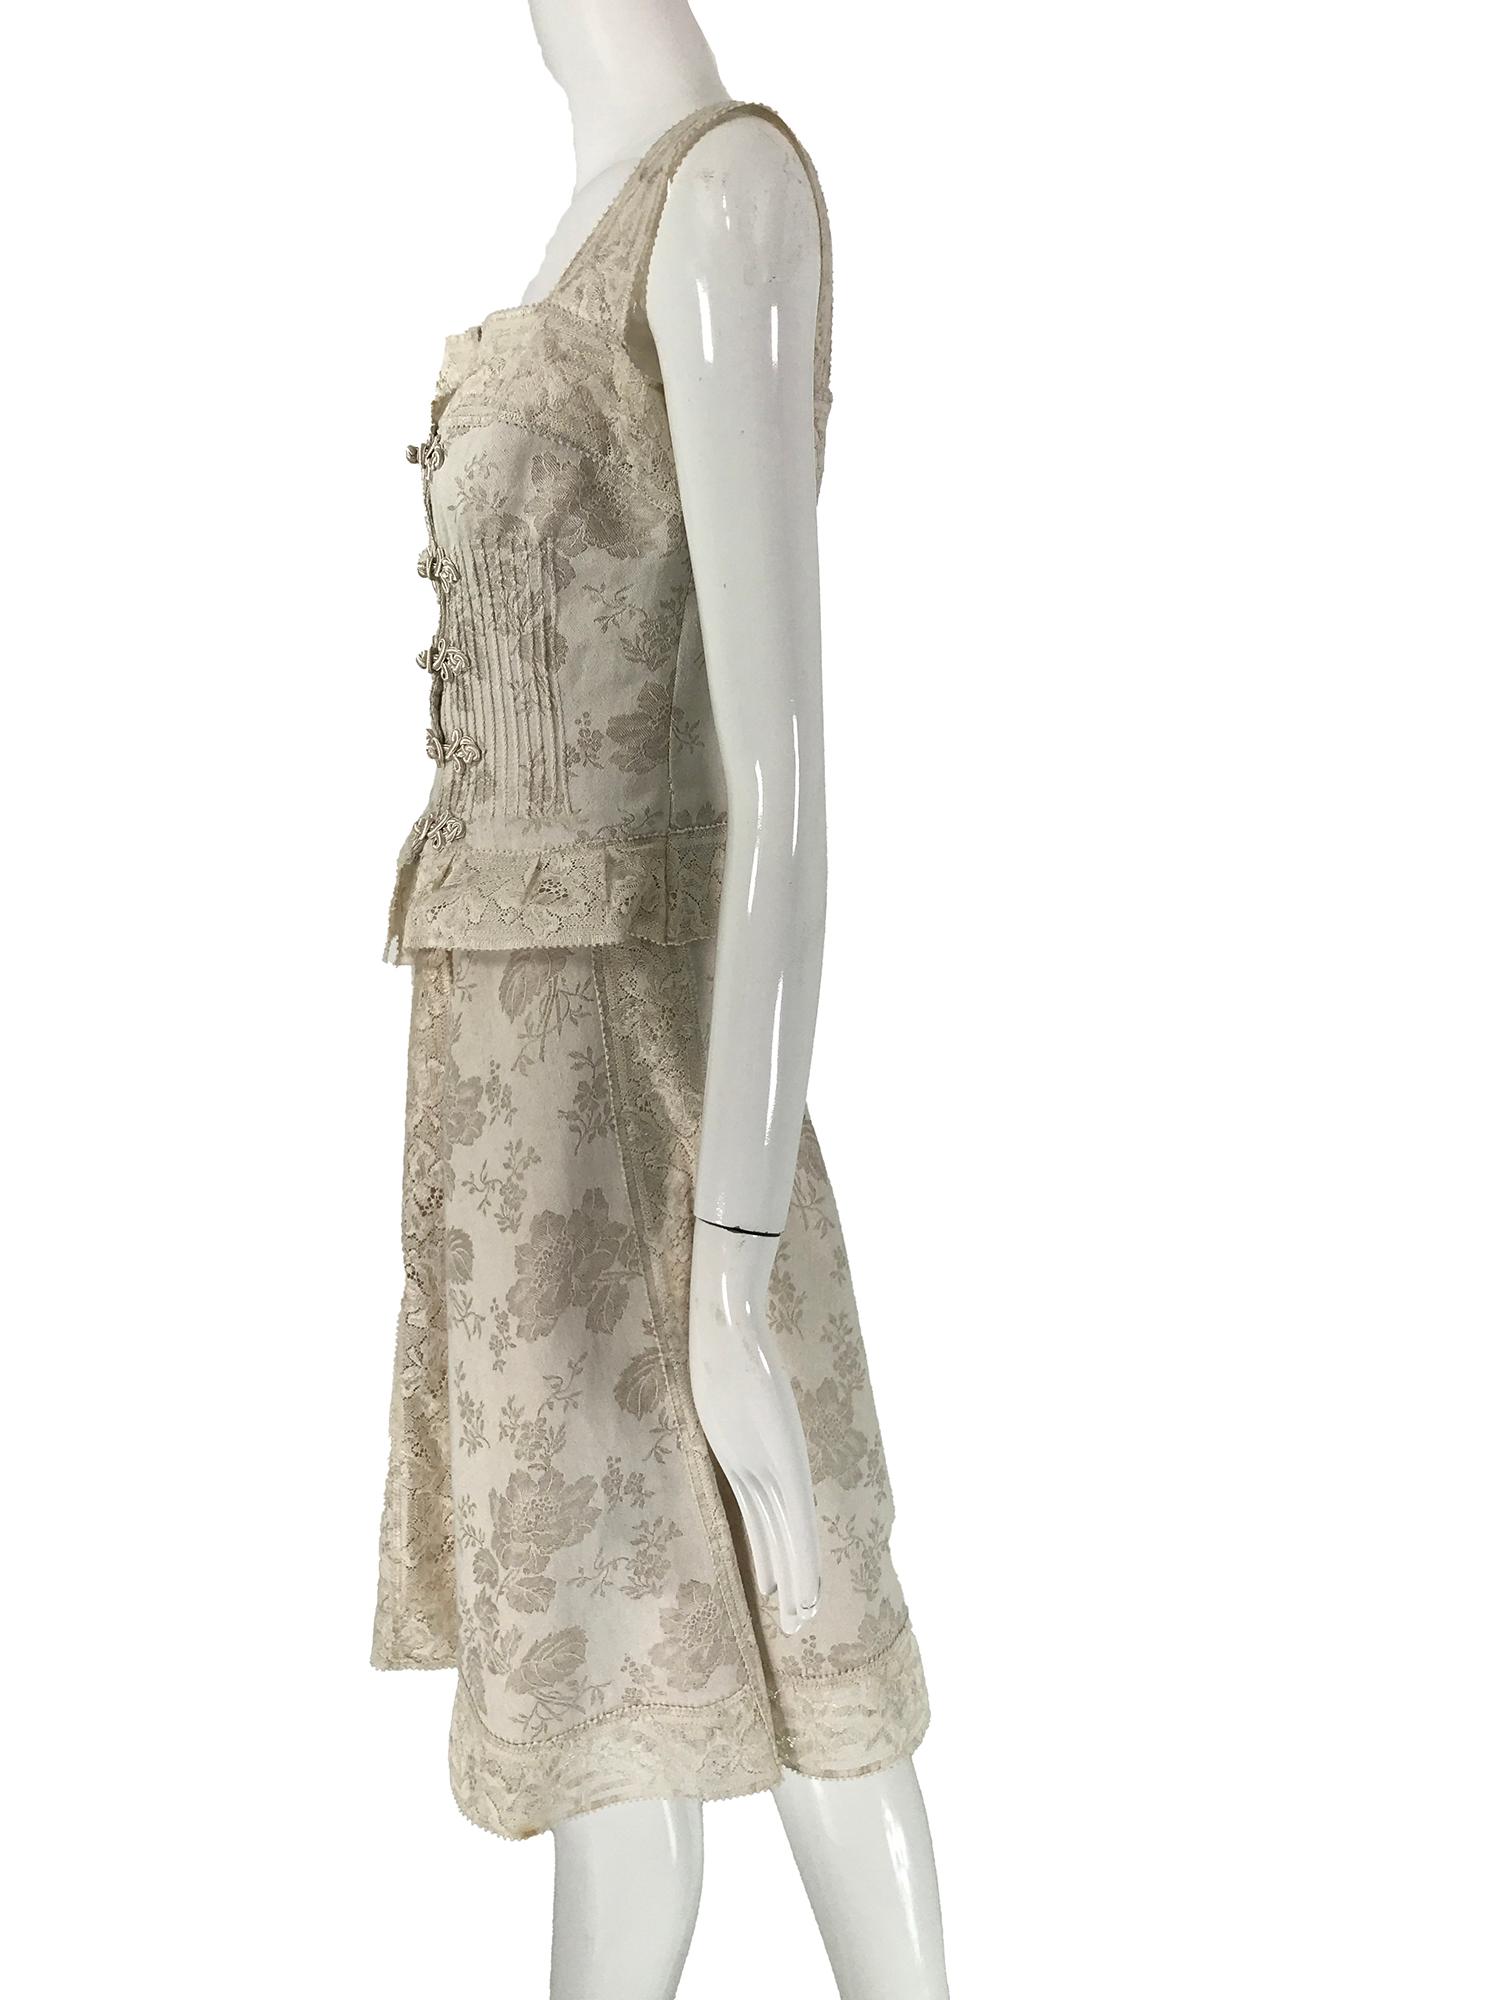 Valentino Boutique Ivory Floral Damask Linen & Lace Camisole Top & Skirt 1980s 2